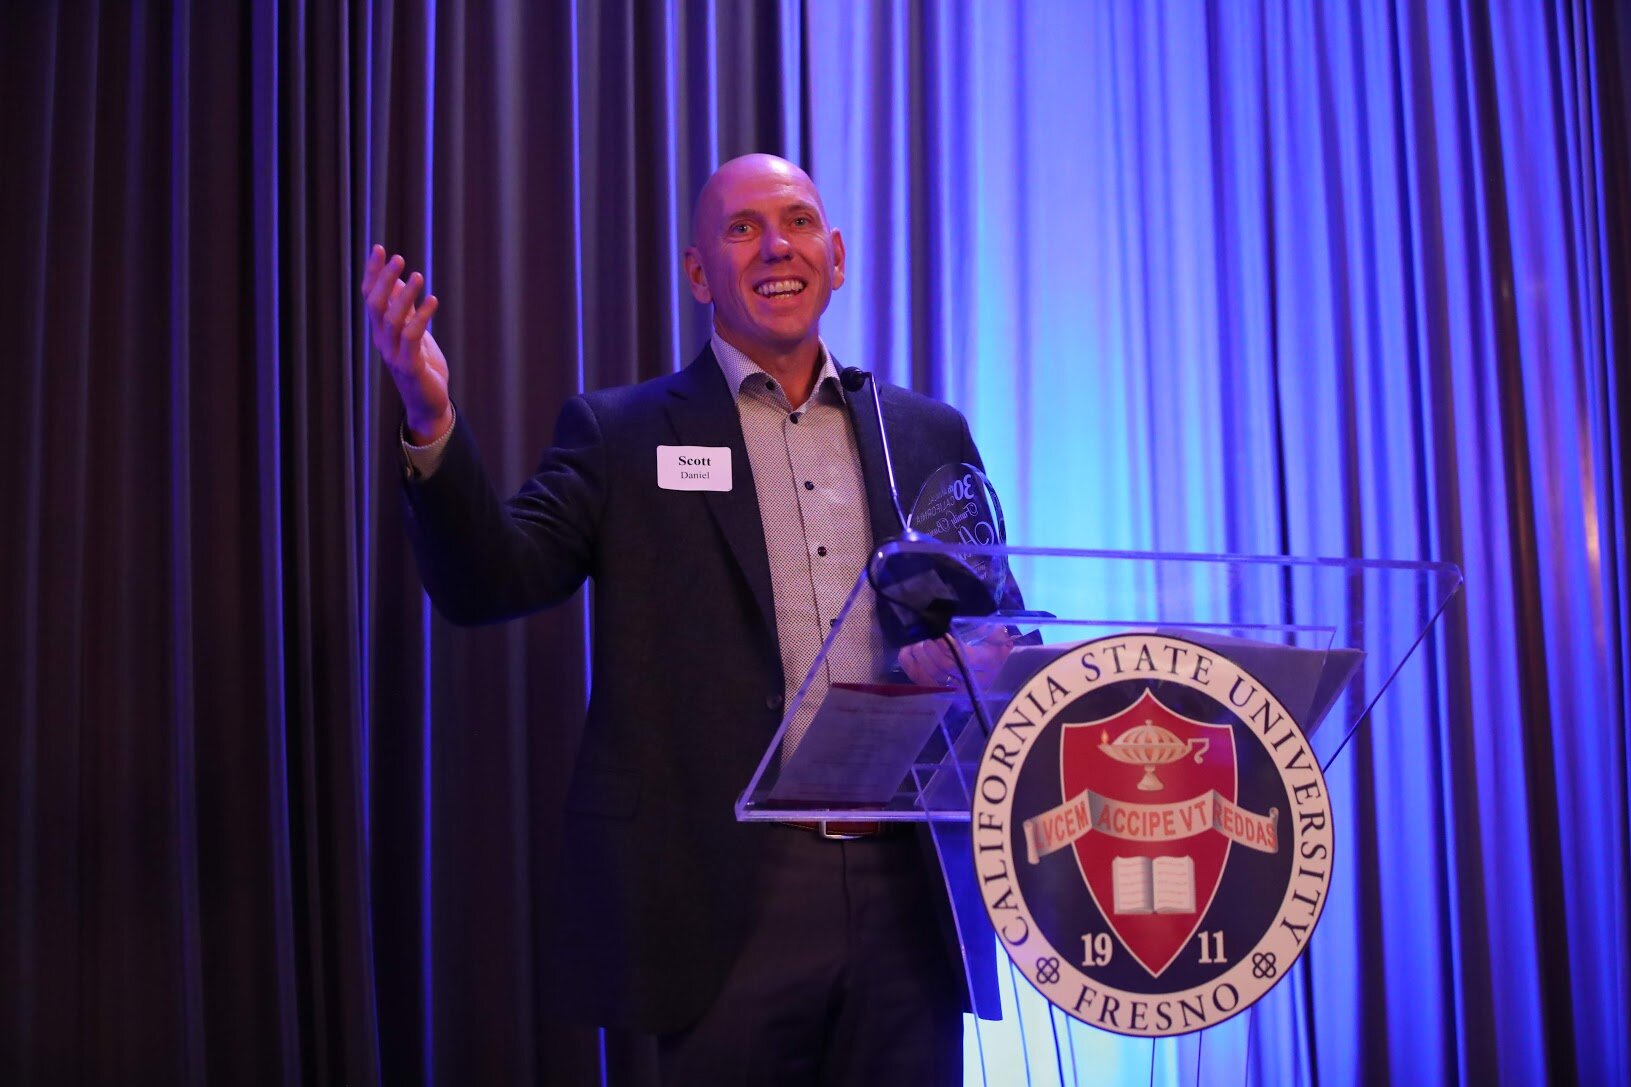 Scott Daniel, President of Young's Commercial Transfer, receiving the 2019 Distinguished Fmaily Business Award on behalf of the company